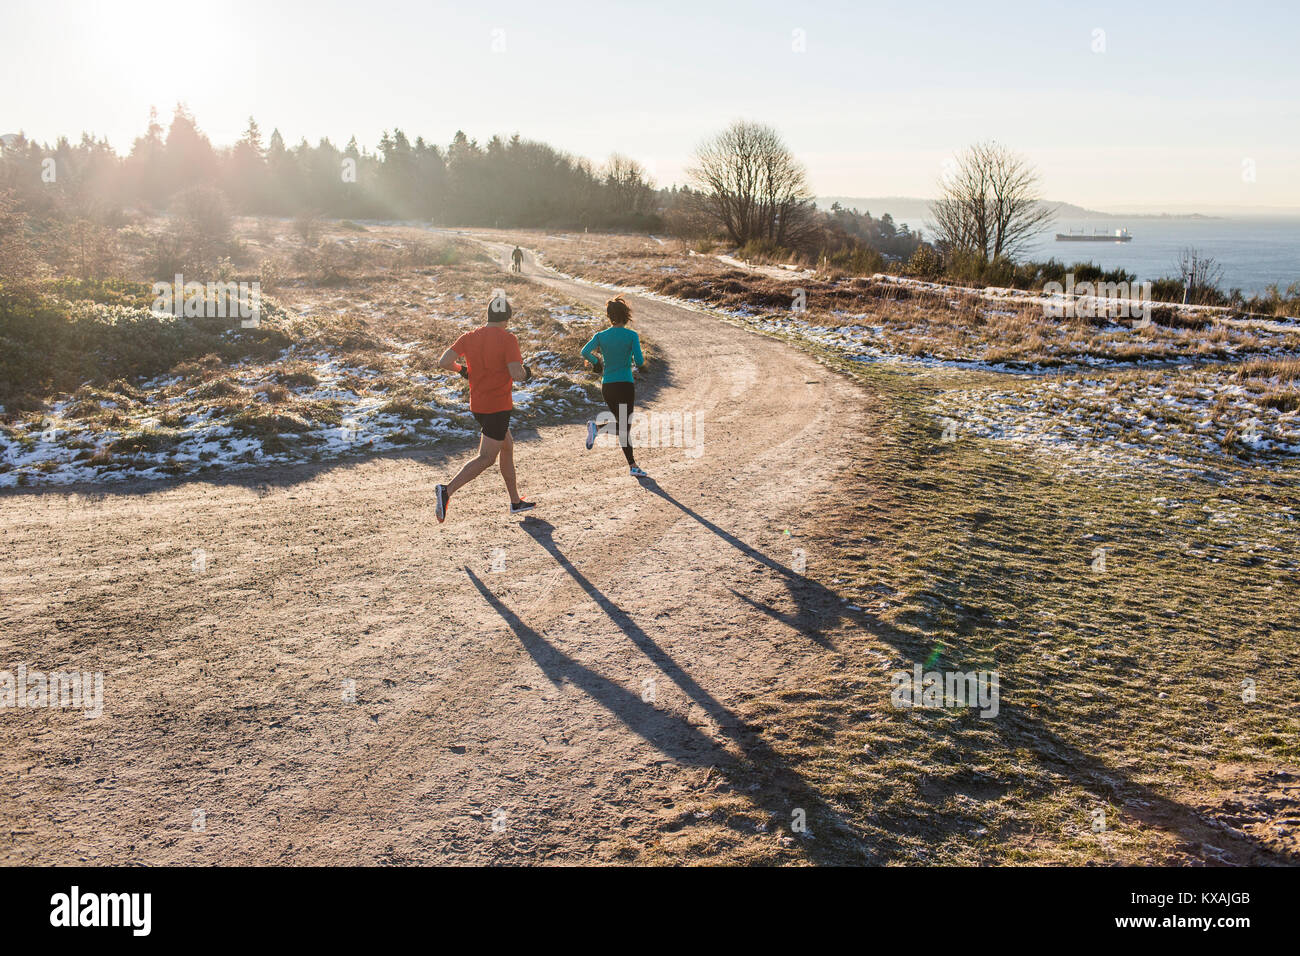 Man and woman jogging on dirt road in winter, Discovery Park, Seattle, Washington State, USA Stock Photo